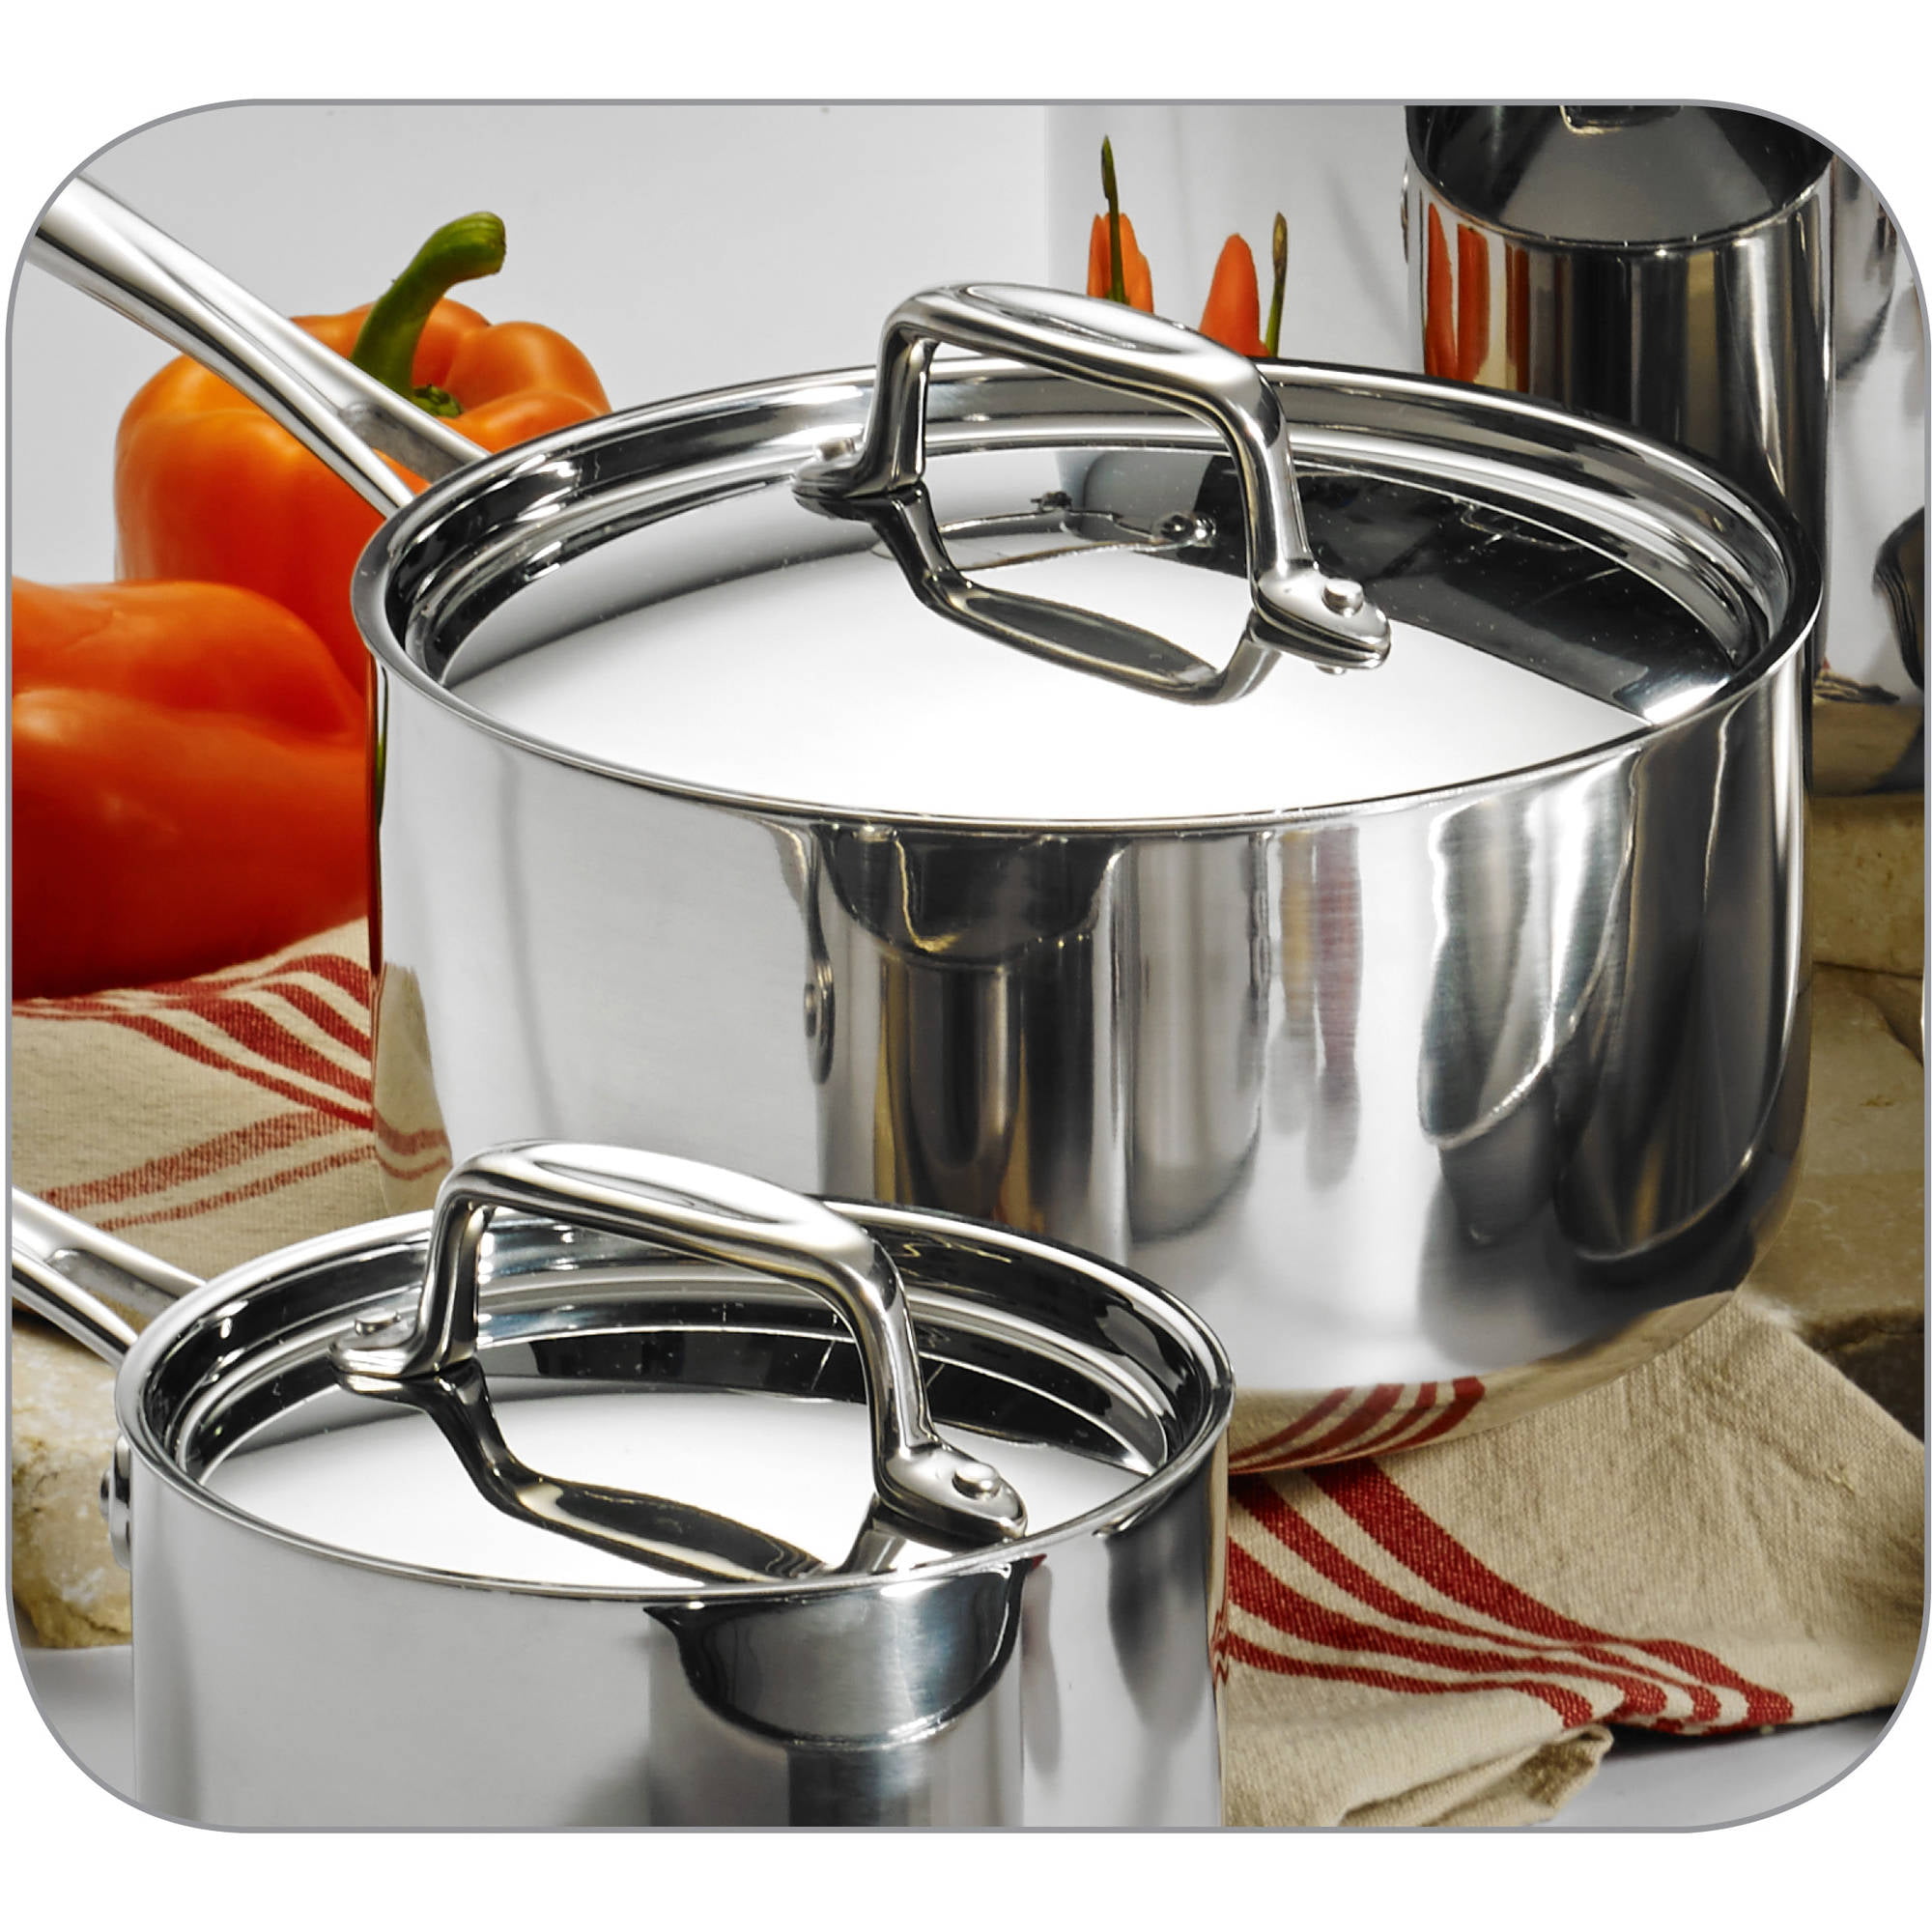 Tramontina 10-piece Tri-ply Clad Cookware Set, Stainless Steel | eBay Stainless Steel Tri Ply Cookware